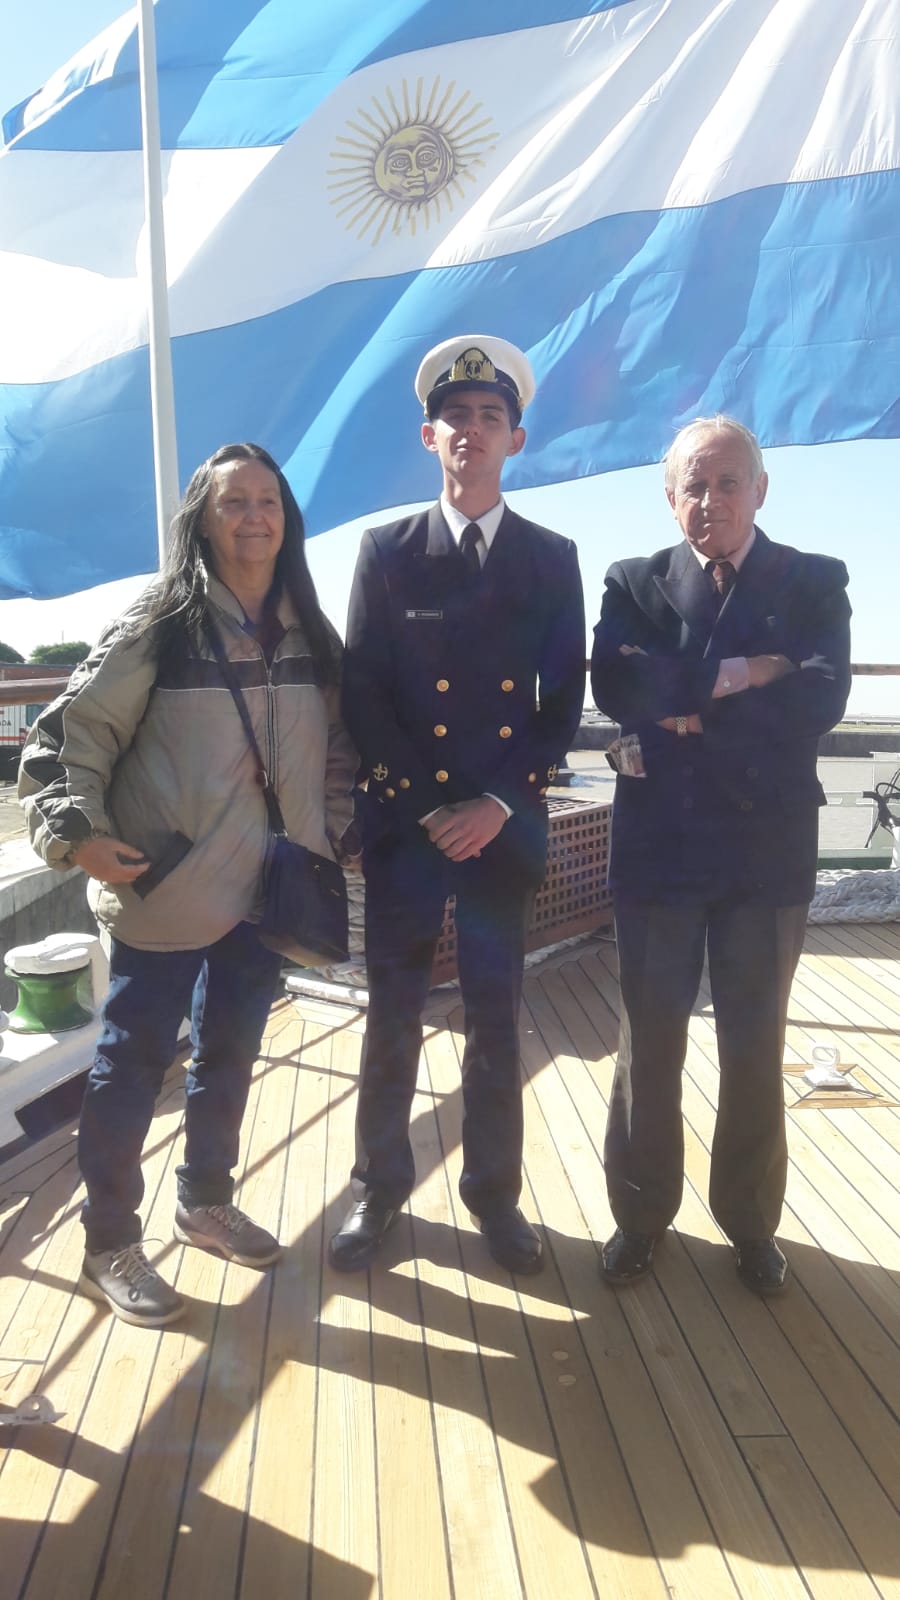 Juan Carlos Pedemonte and his wife Martha surround their son Hernán, midshipman of the Fraga ARA Libertad, as he sets sail on April 30, 2022